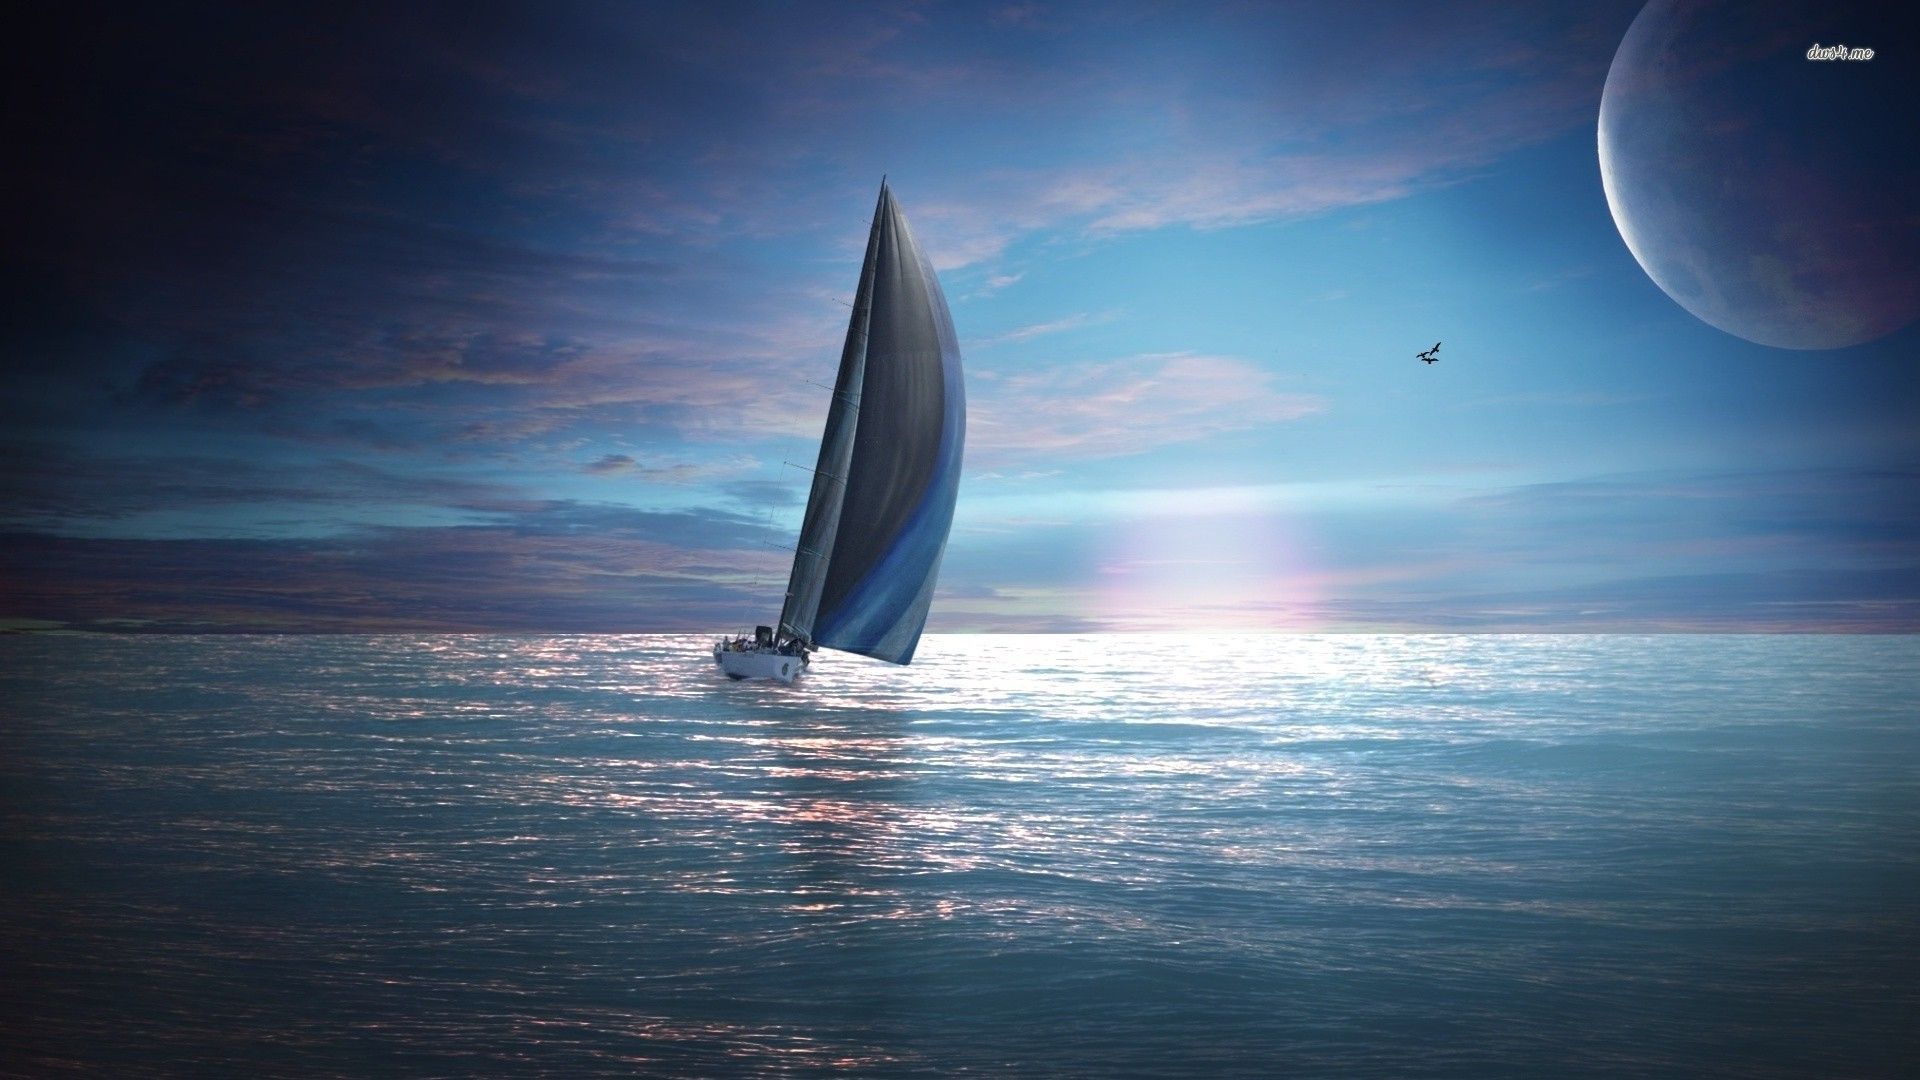 Sailing in the dusk wallpaper - Fantasy wallpapers - #13052